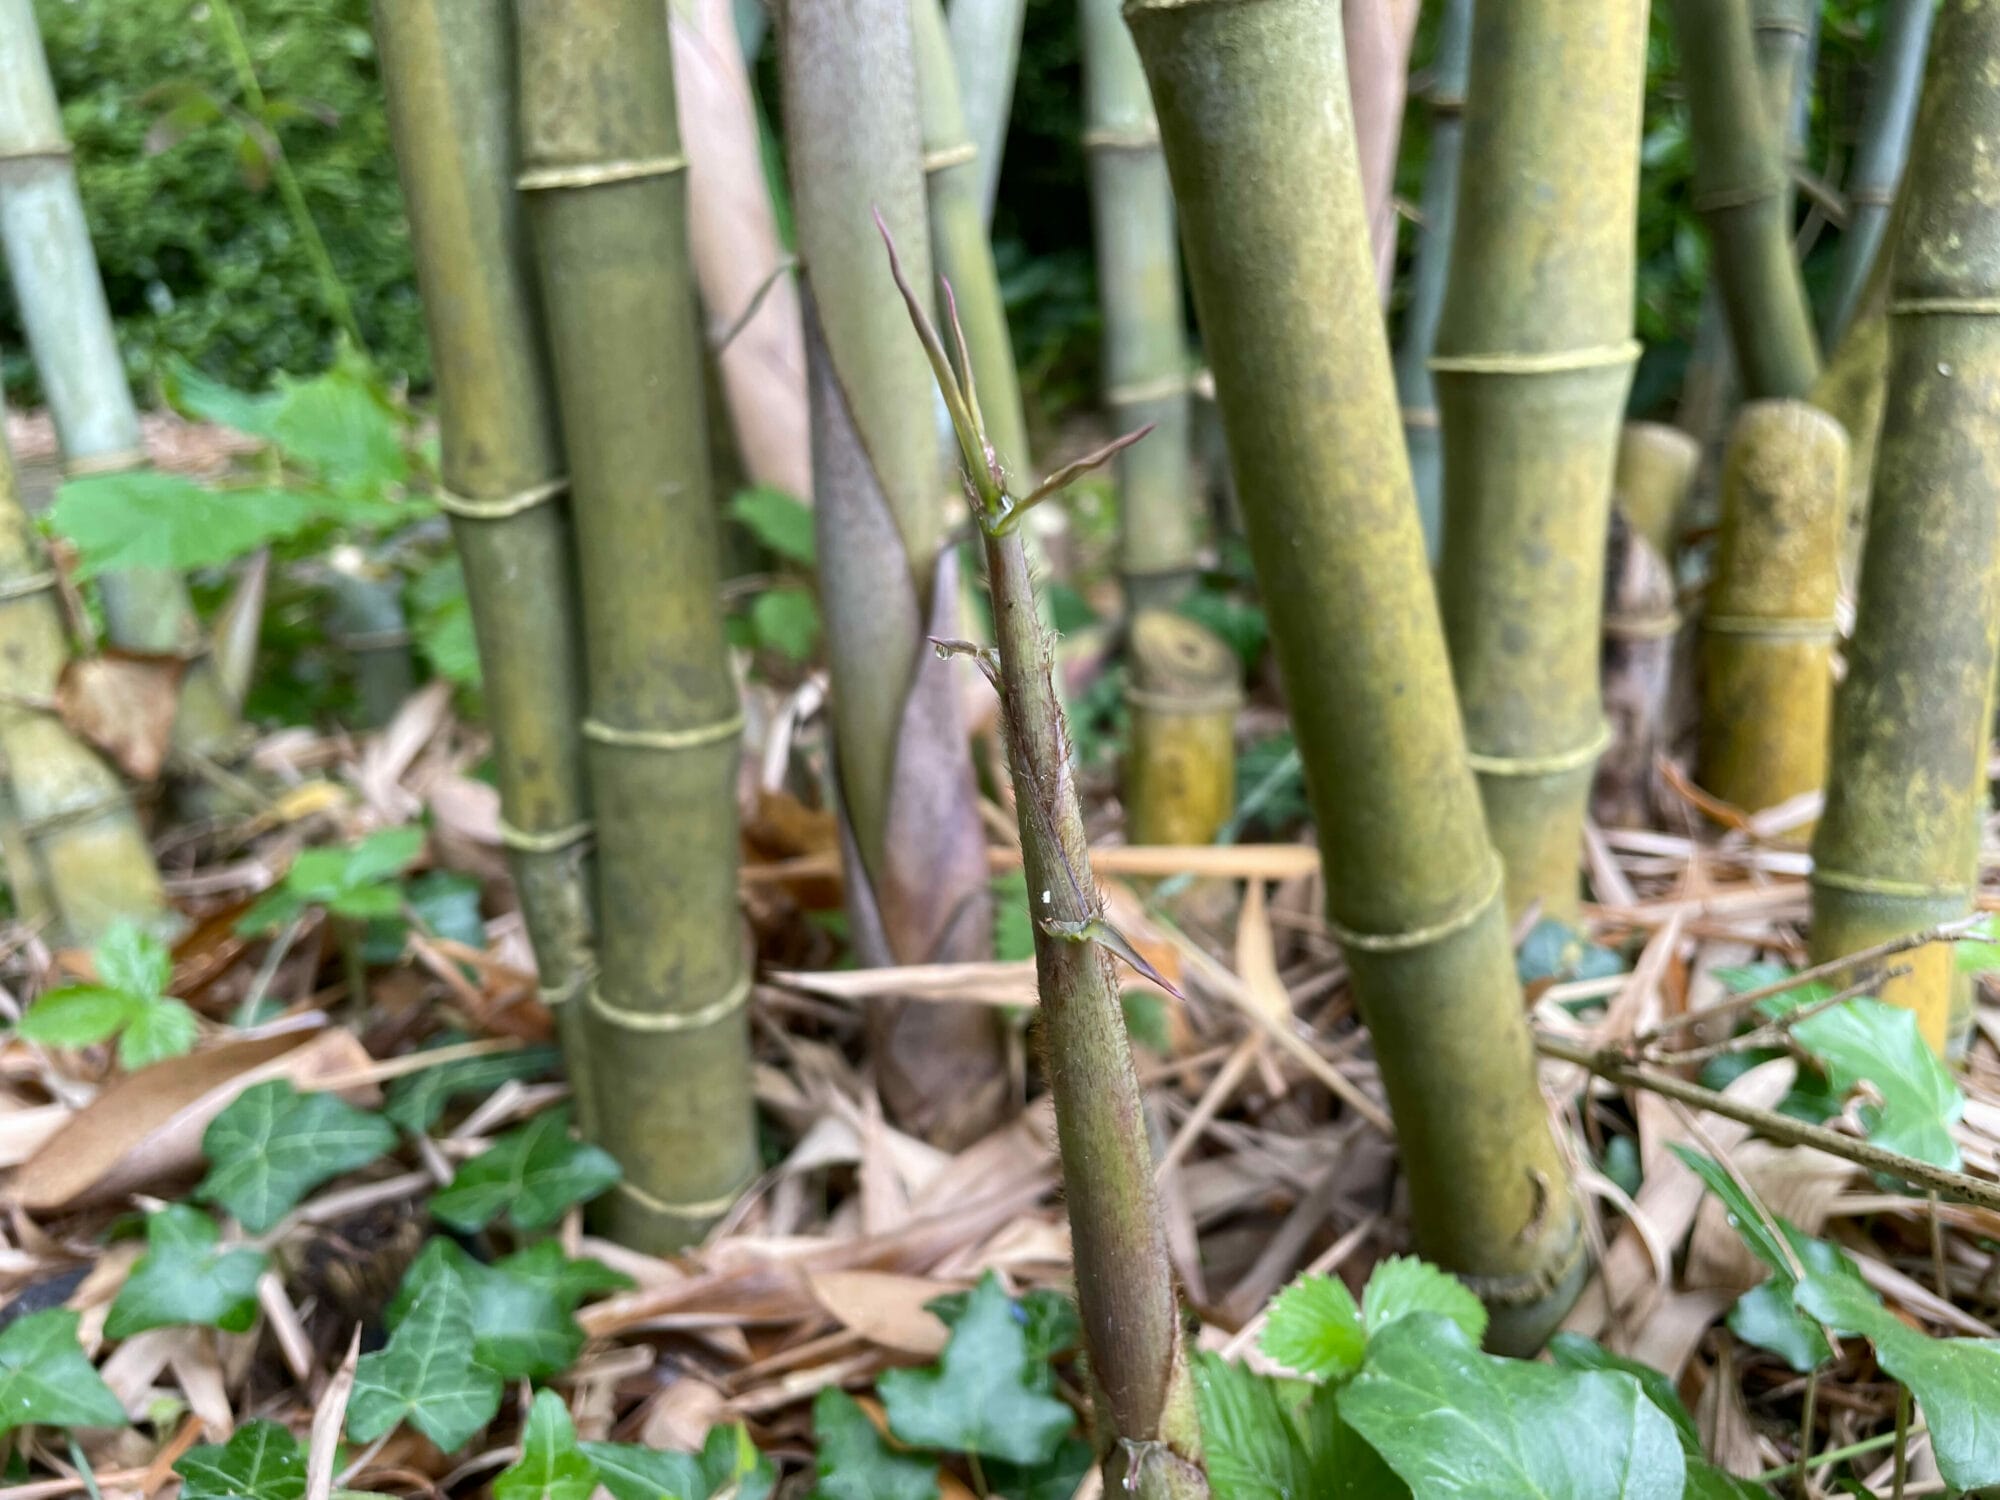 Bamboo Control: How To Get Rid Of Bamboo